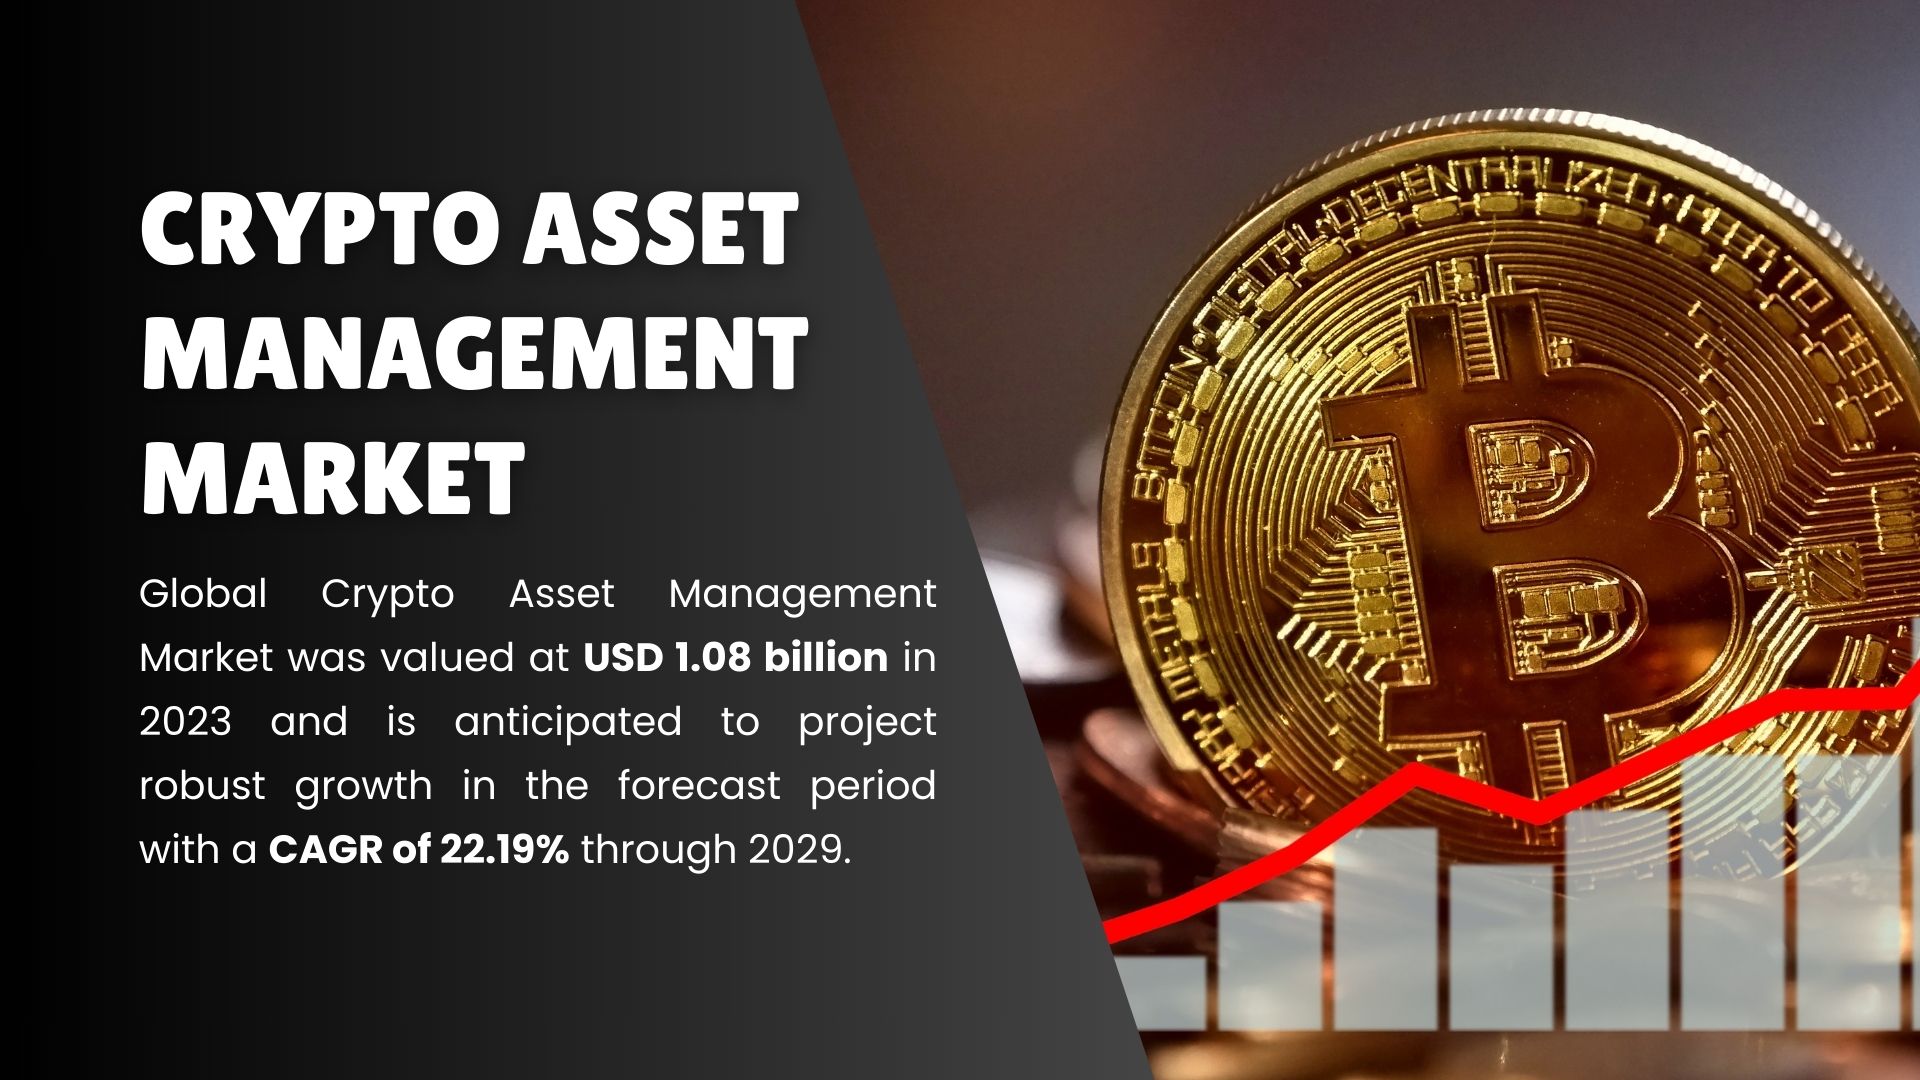 Crypto Asset Management Market Unlocking Potential: Analysis of Size, Share, Trends, and Growth